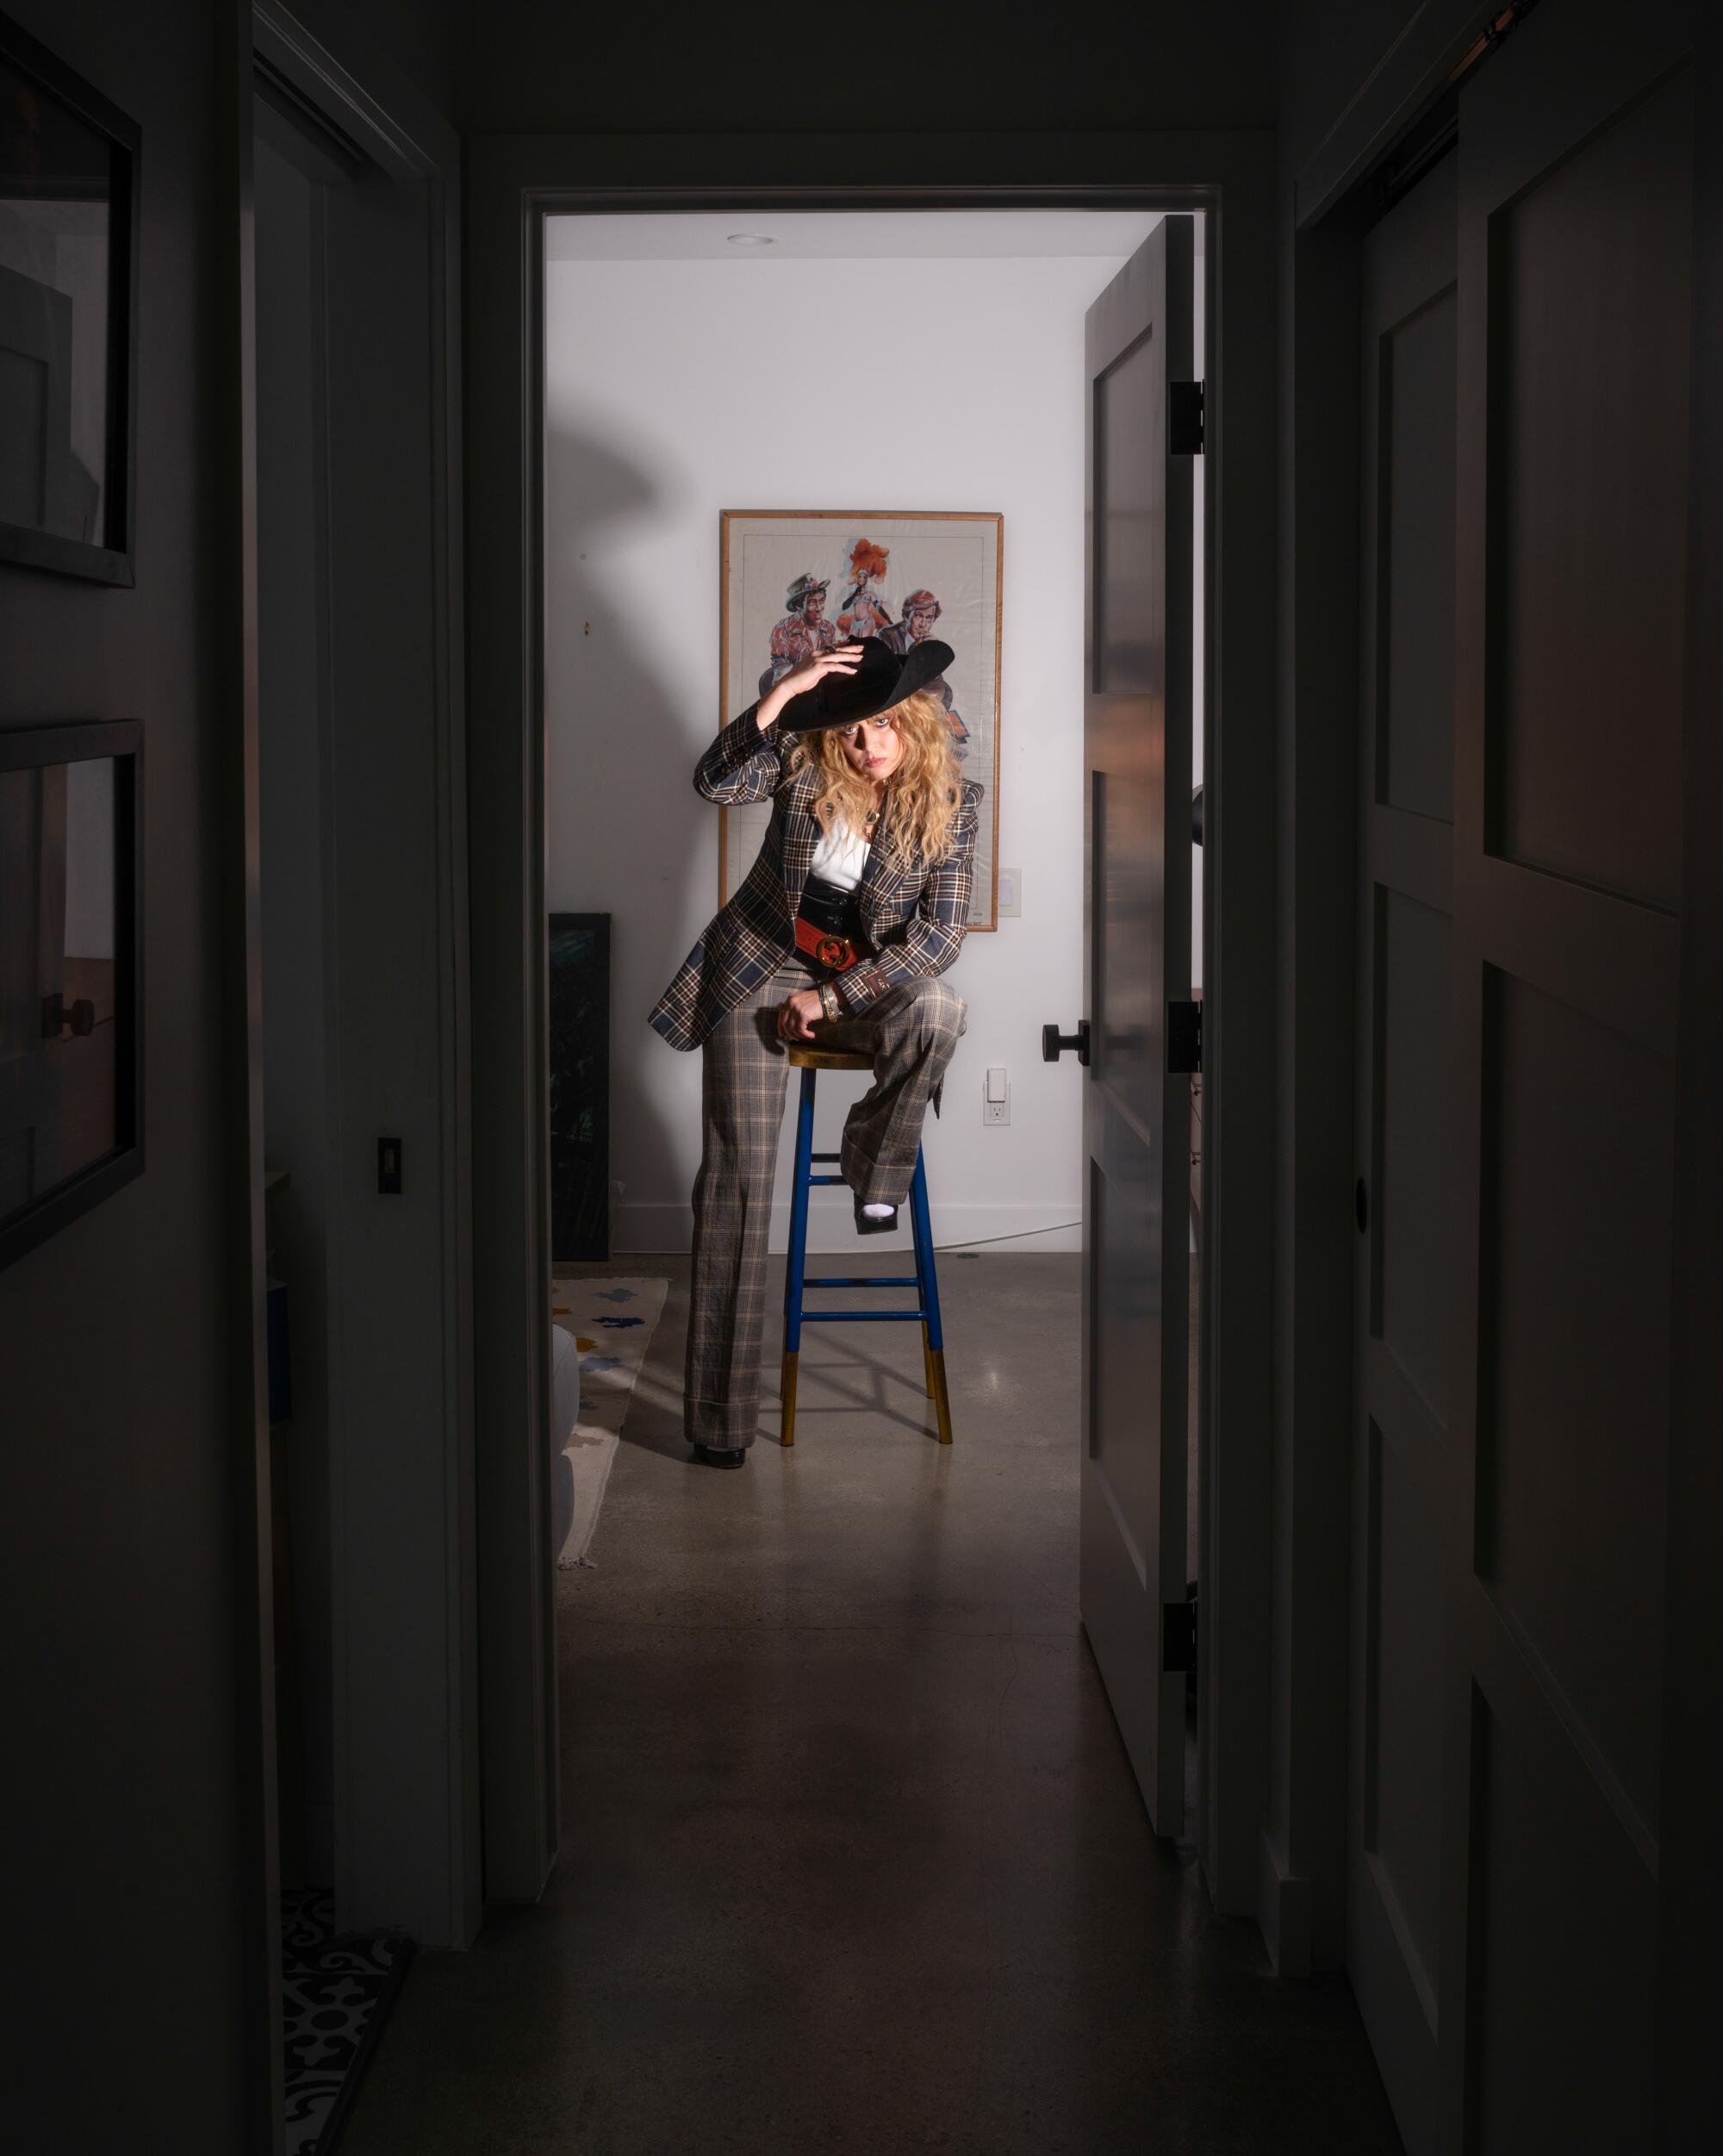 A woman sits on a stool at the end of a dark hallway